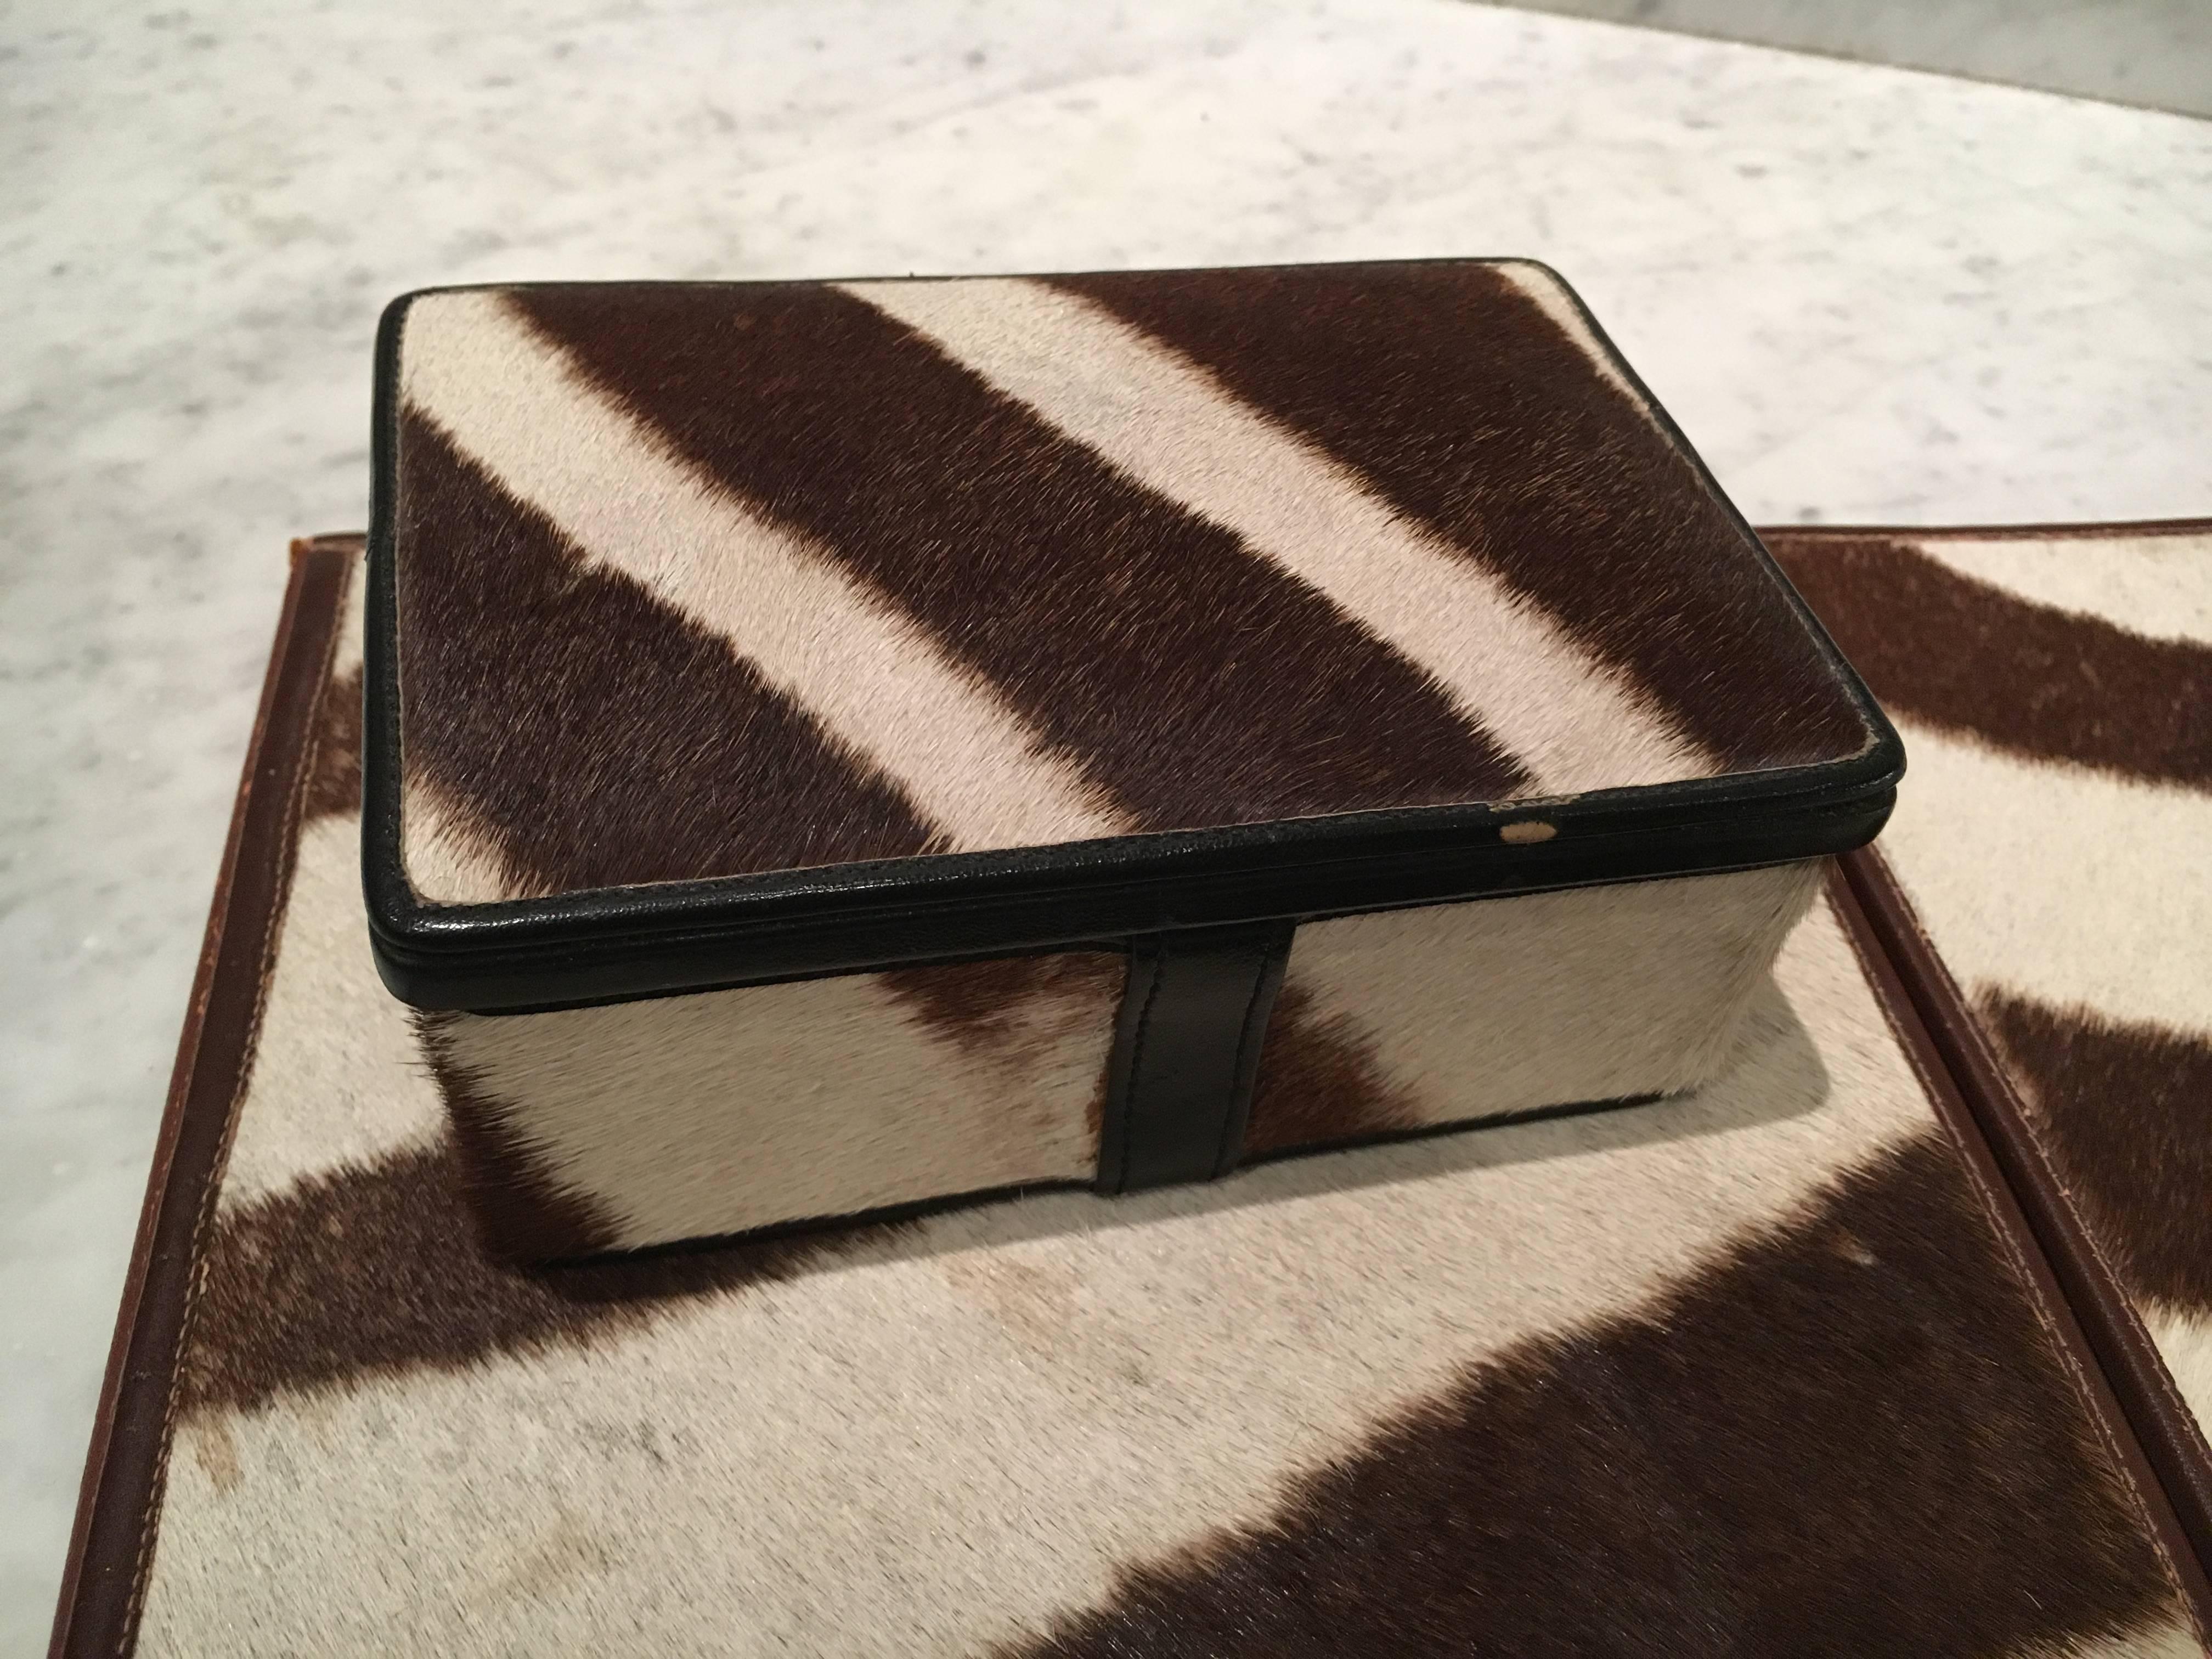 Rarely found desk set in authentic vintage zebra hide and leather, including a desk blotter and box. Blotter measures 11.5" deep X 18" wide when closed and 11.5" deep X 36" wide when open. The box measures 6.25" wide X